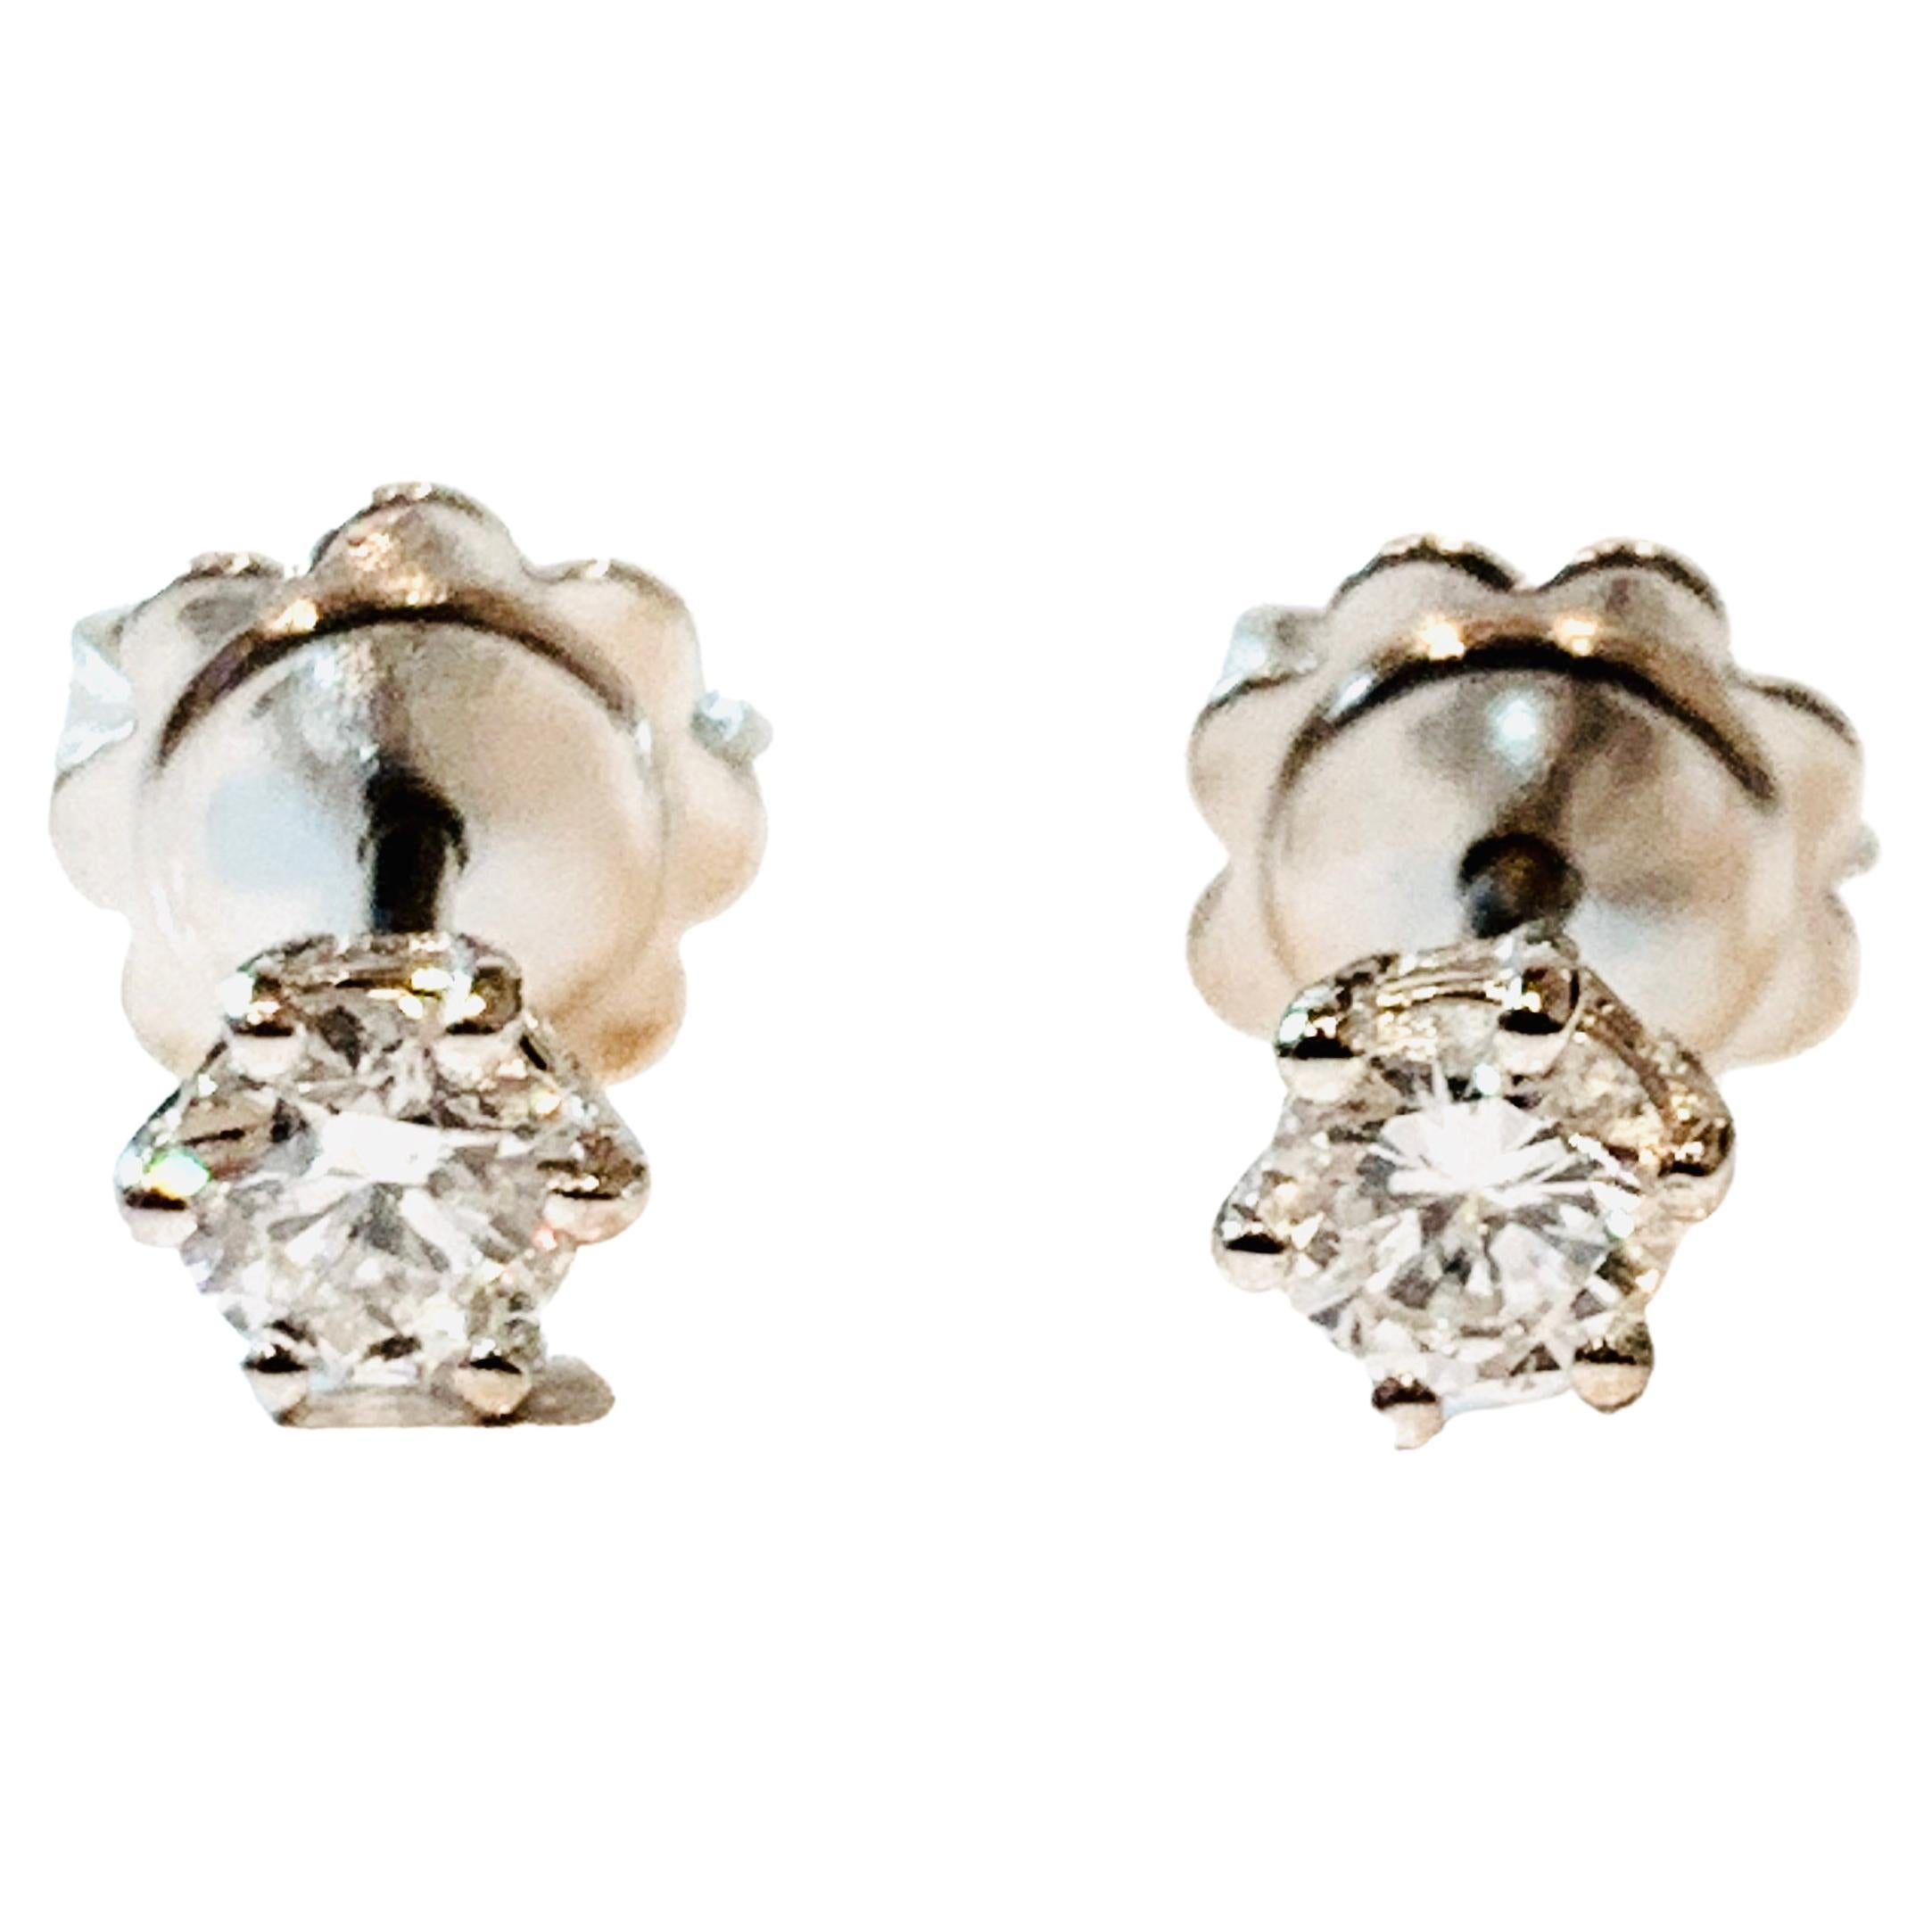 These certified 0.50 carat Diamond stud earrings are from the HRD Antwerp Star collection. 

Designed with the Diamond nestled within a 5 pointed 18Kt white Gold star and secured on the ear with butterfly back closures. 

High quality natural